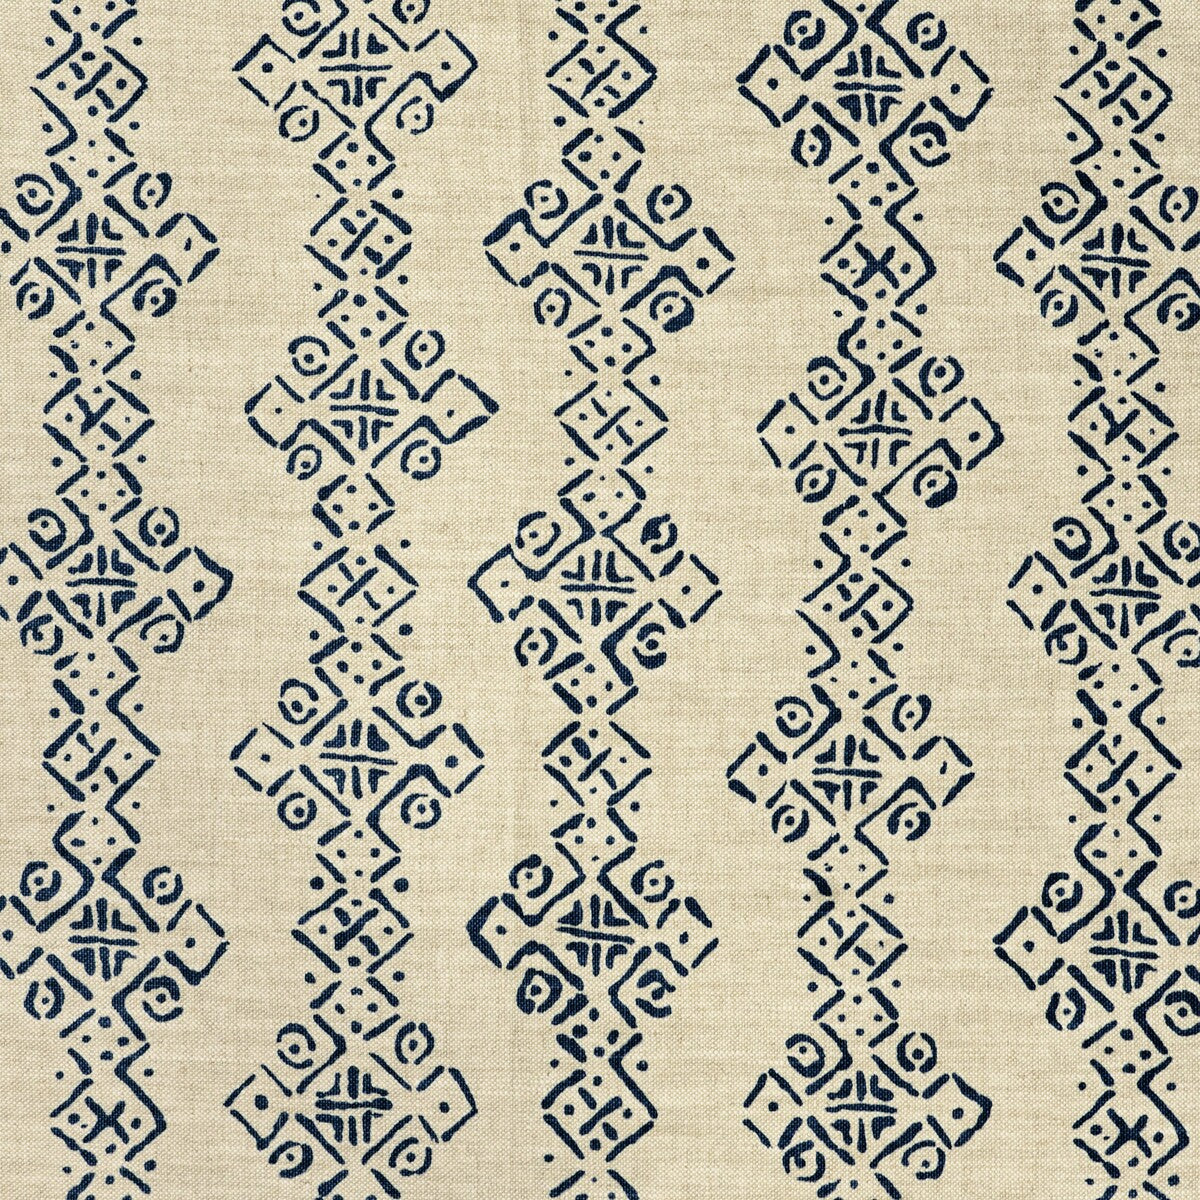 Mali fabric in indigo color - pattern BFC-3674.50.0 - by Lee Jofa in the Blithfield collection